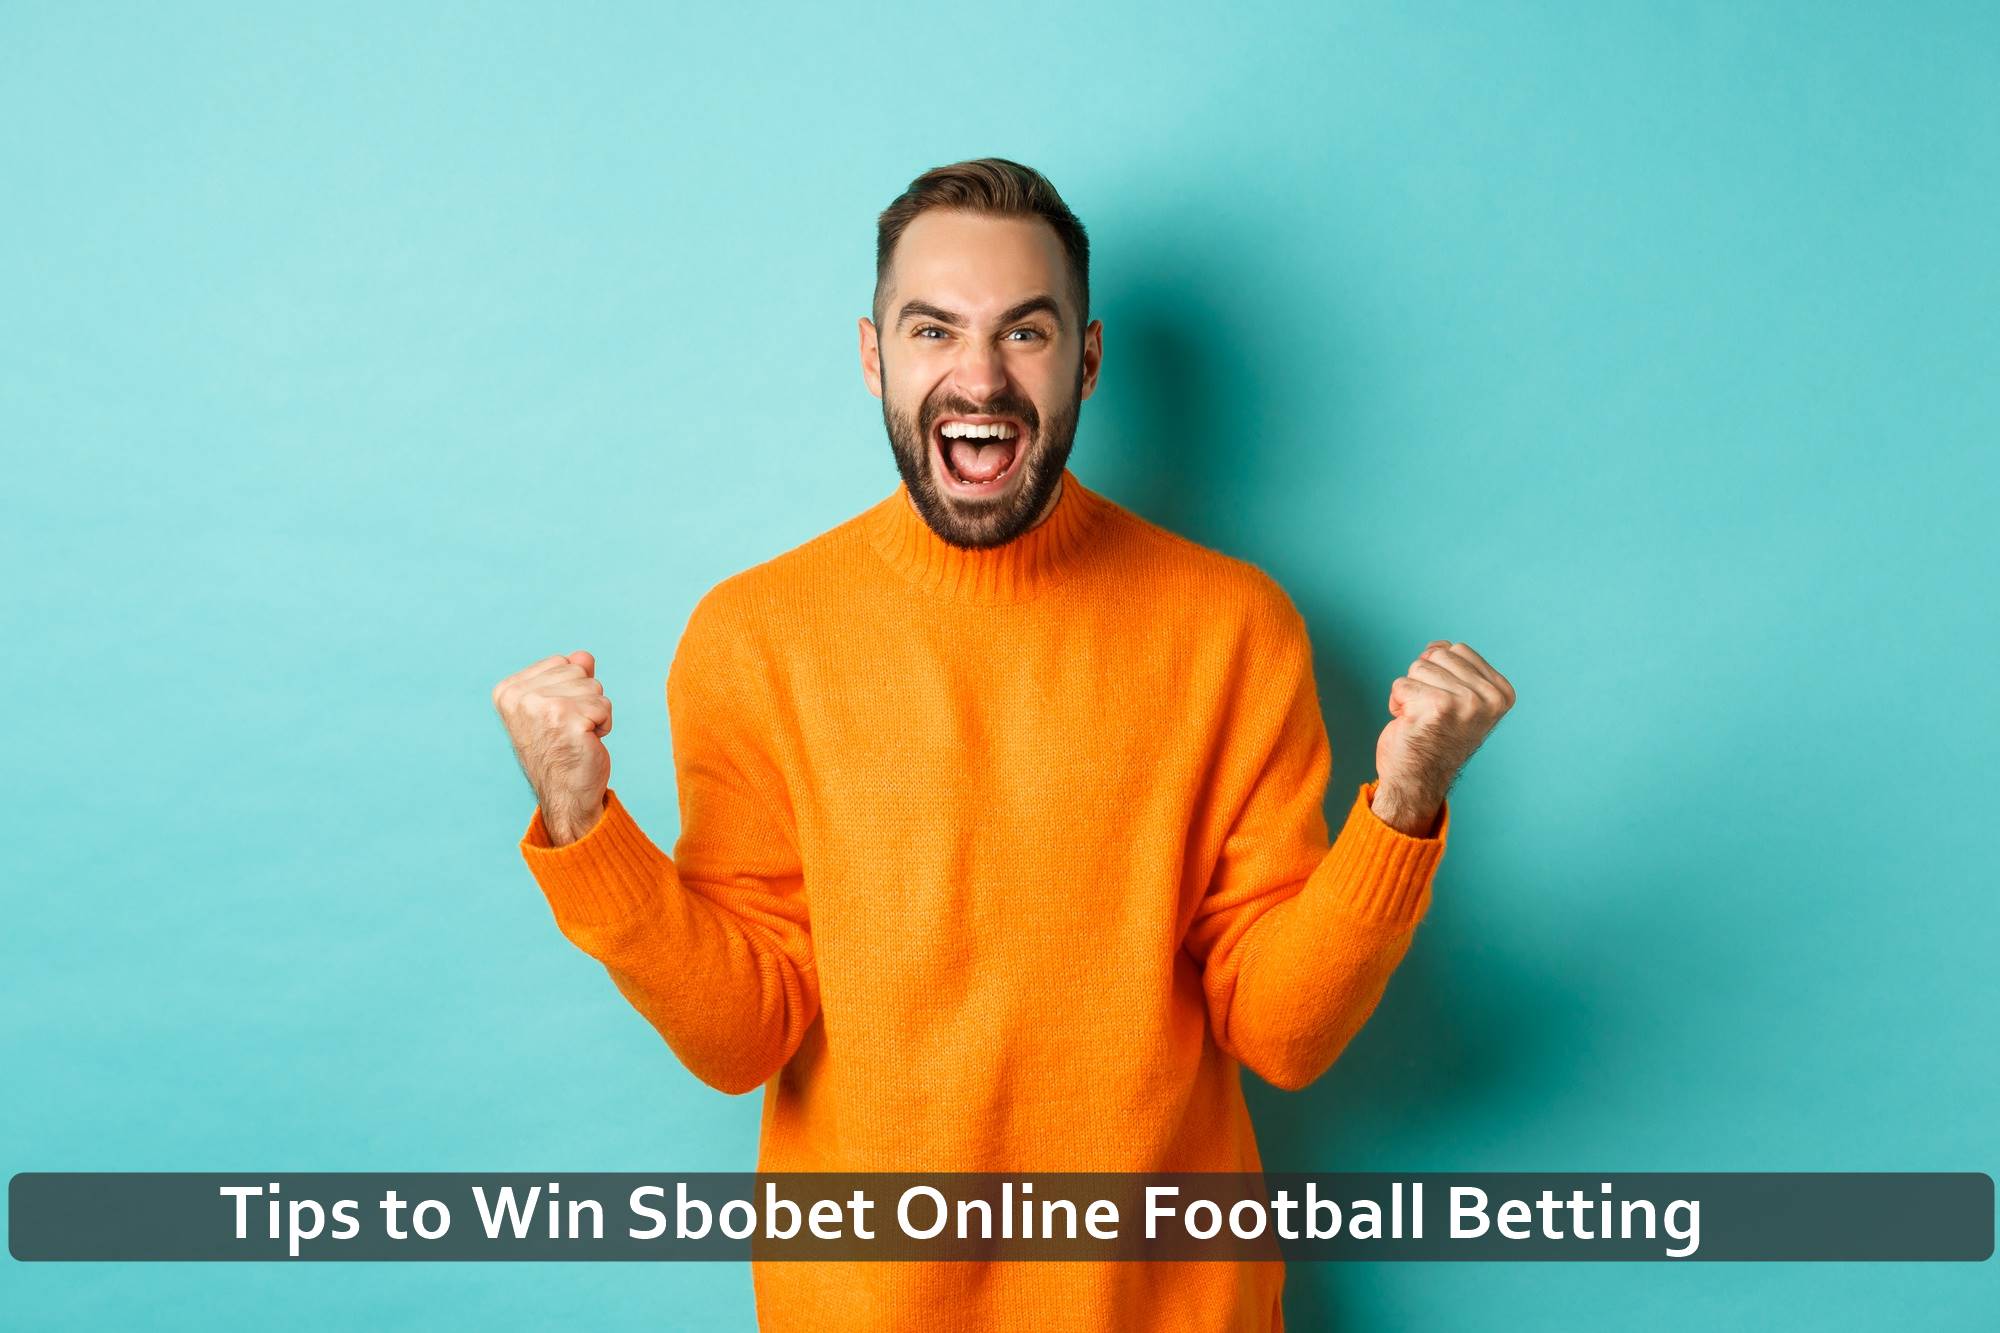 Tips to Win Sbobet Online Football Betting